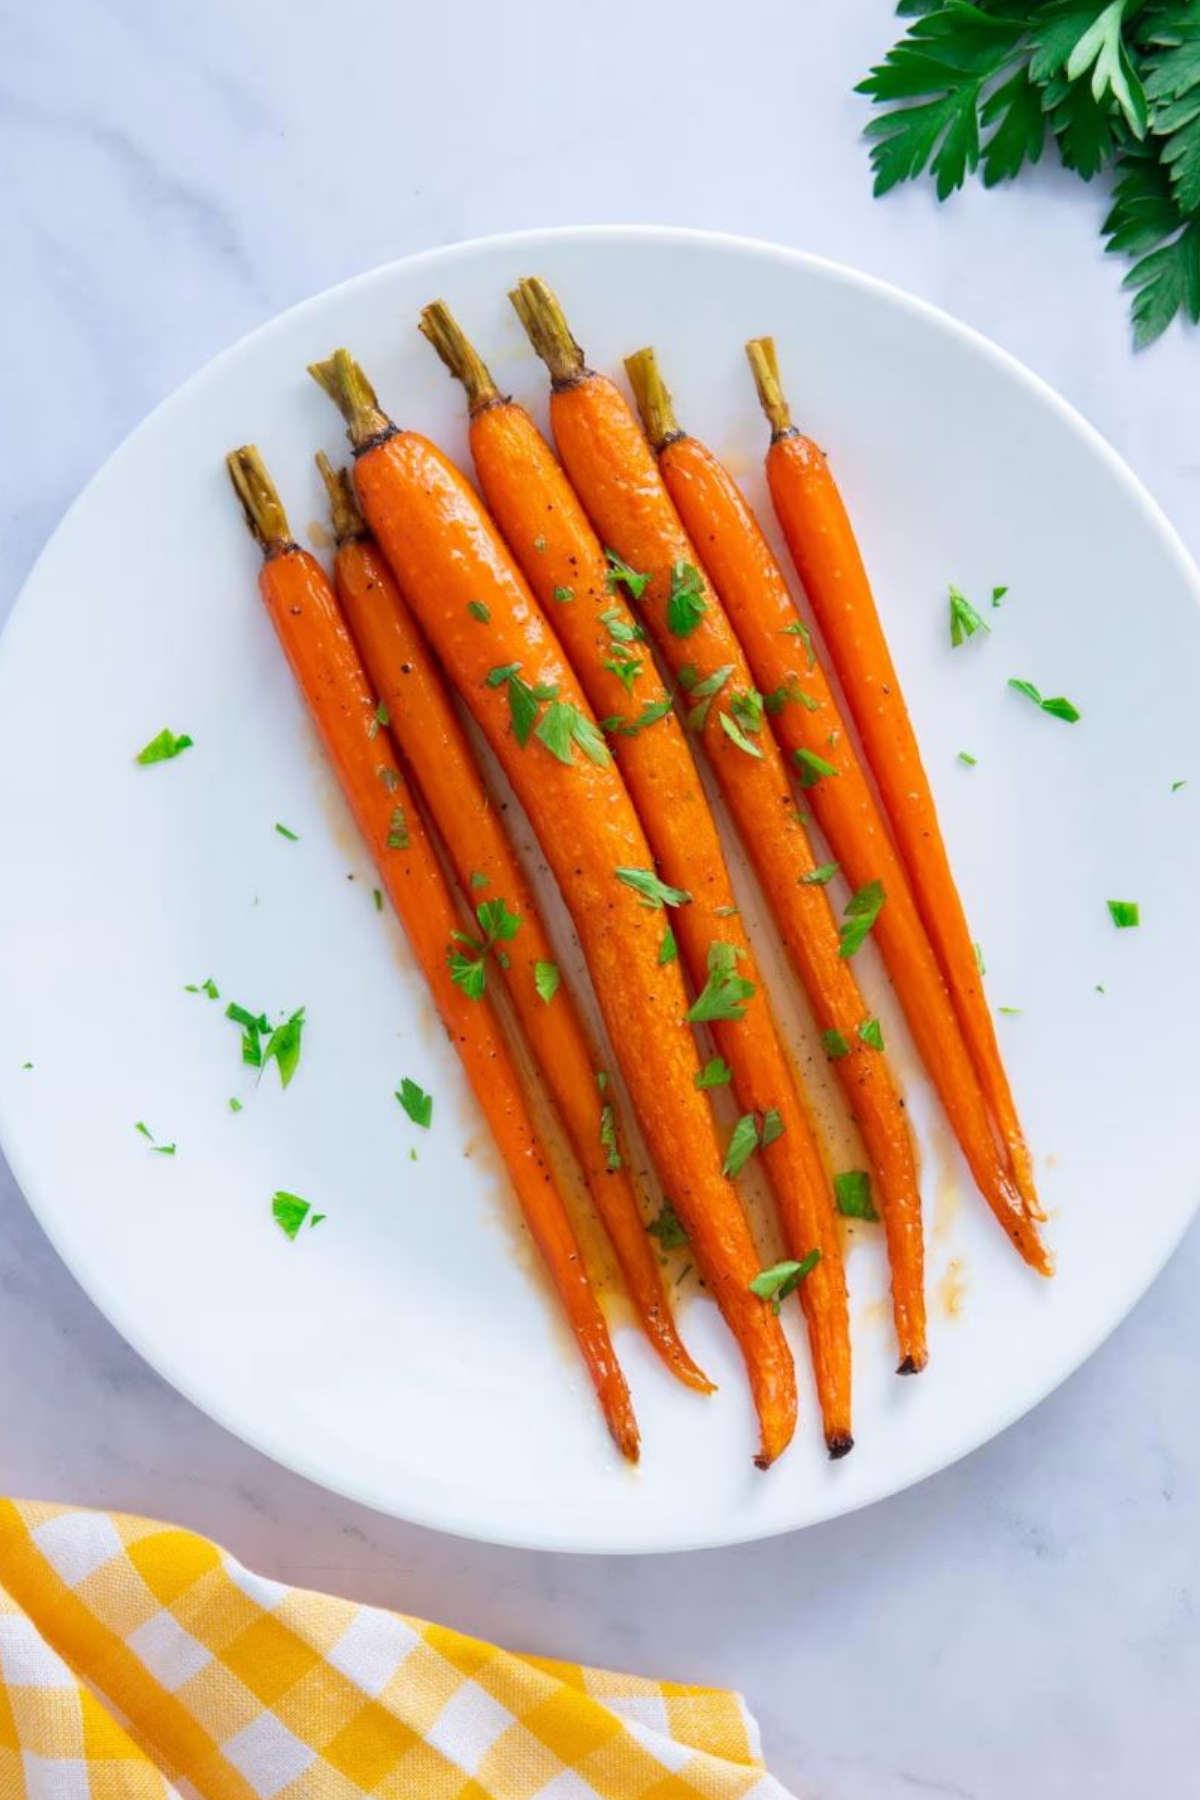 Maple glazed carrots on a round white plate, garnished with parsley leaves.